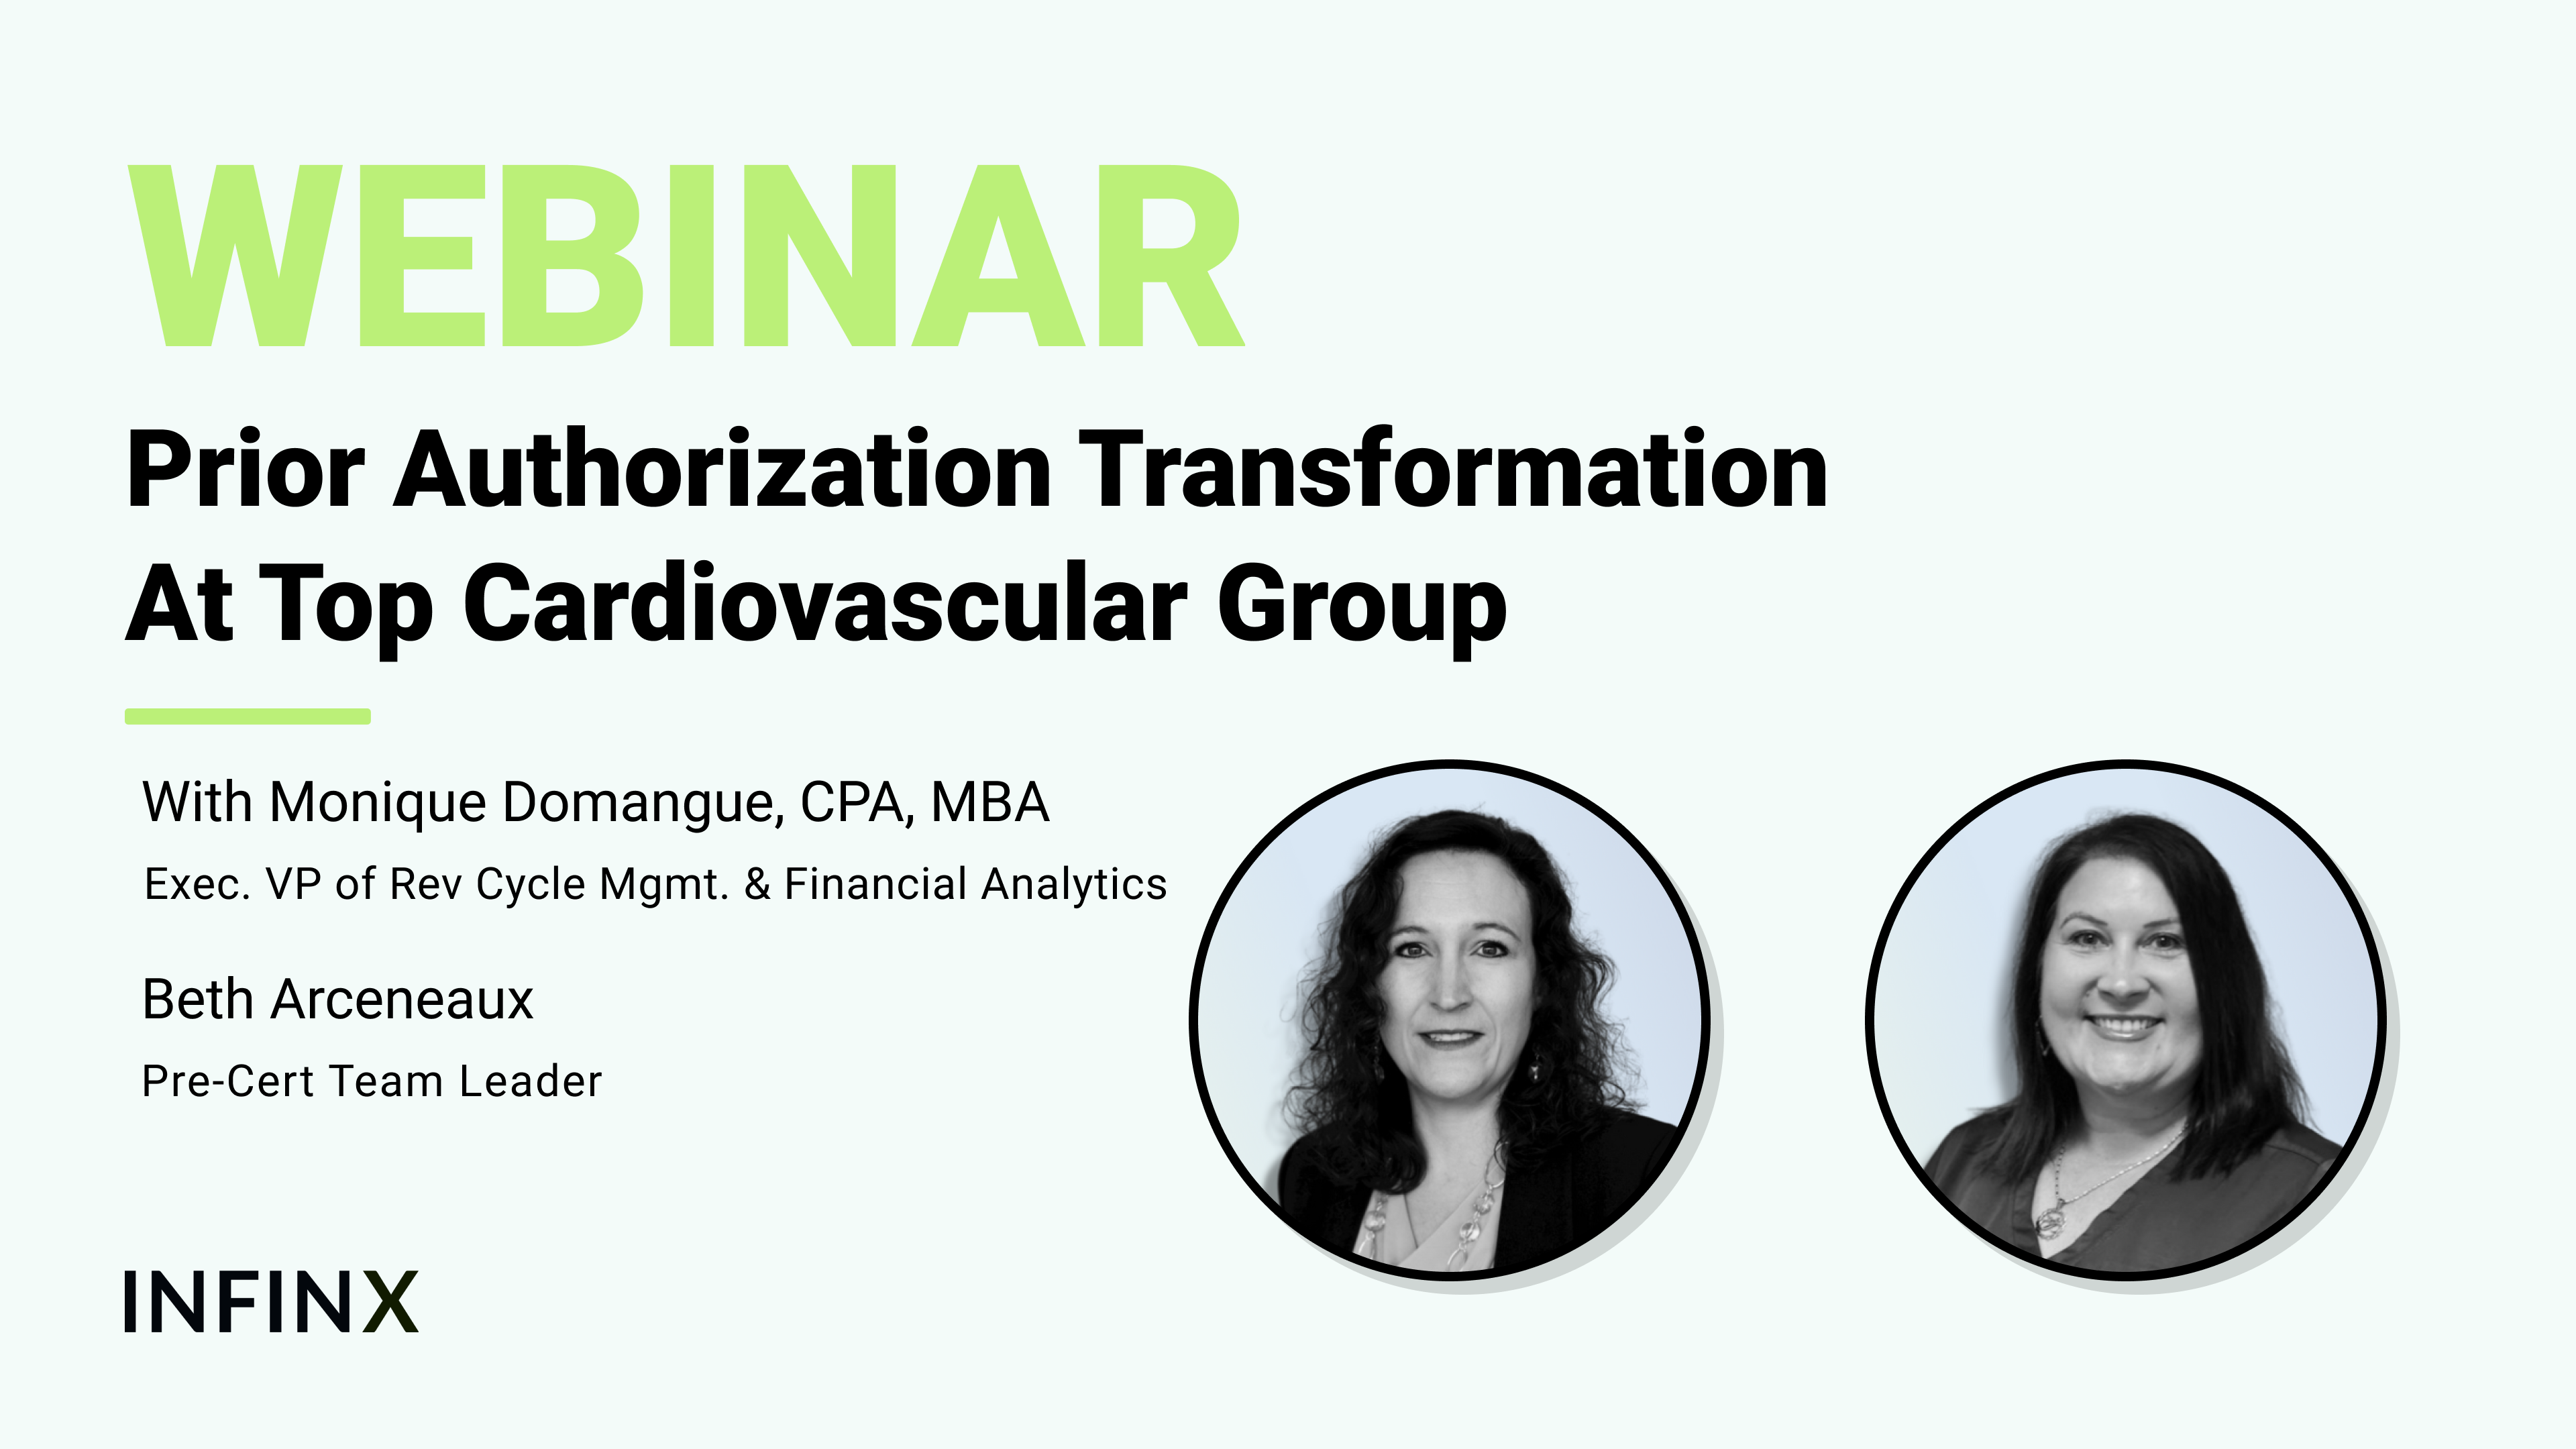 Prior Authorization Transformation At Top Cardiovascular Group